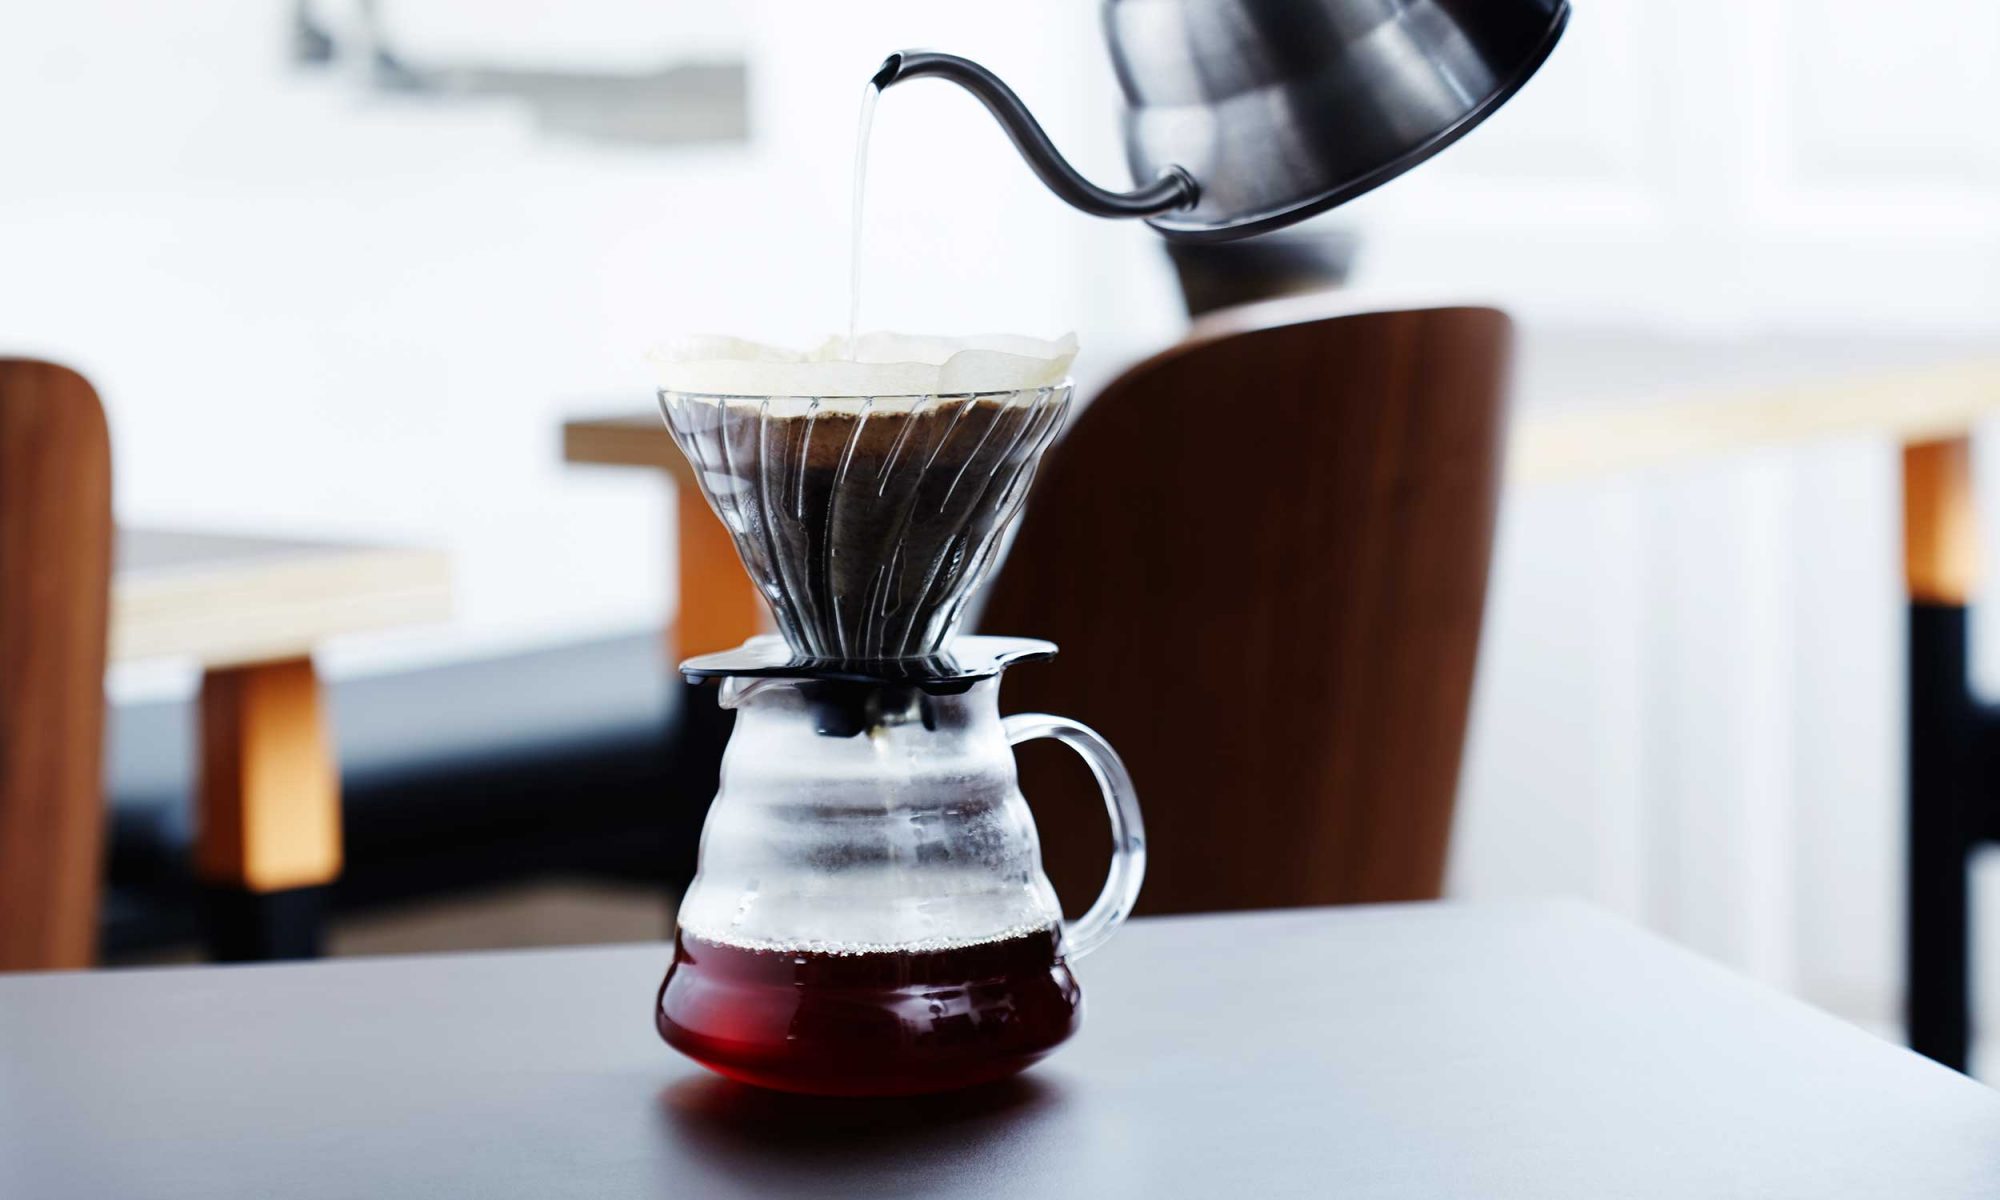 EC: A Beginner's Guide to Making Pour-Over Coffee at Home